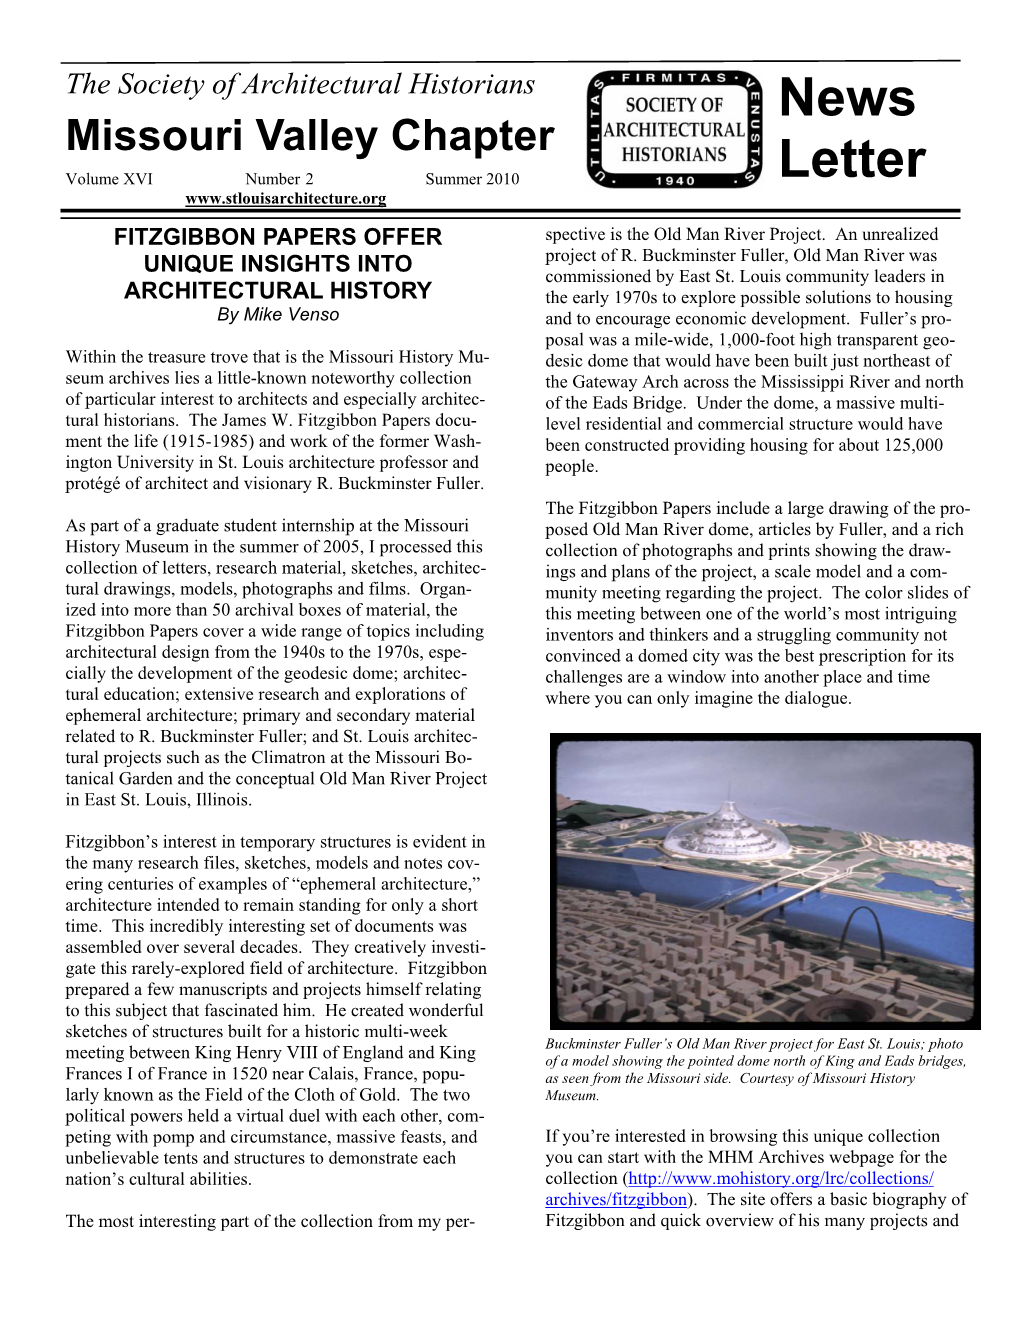 Summer 2010 Letter FITZGIBBON PAPERS OFFER Spective Is the Old Man River Project